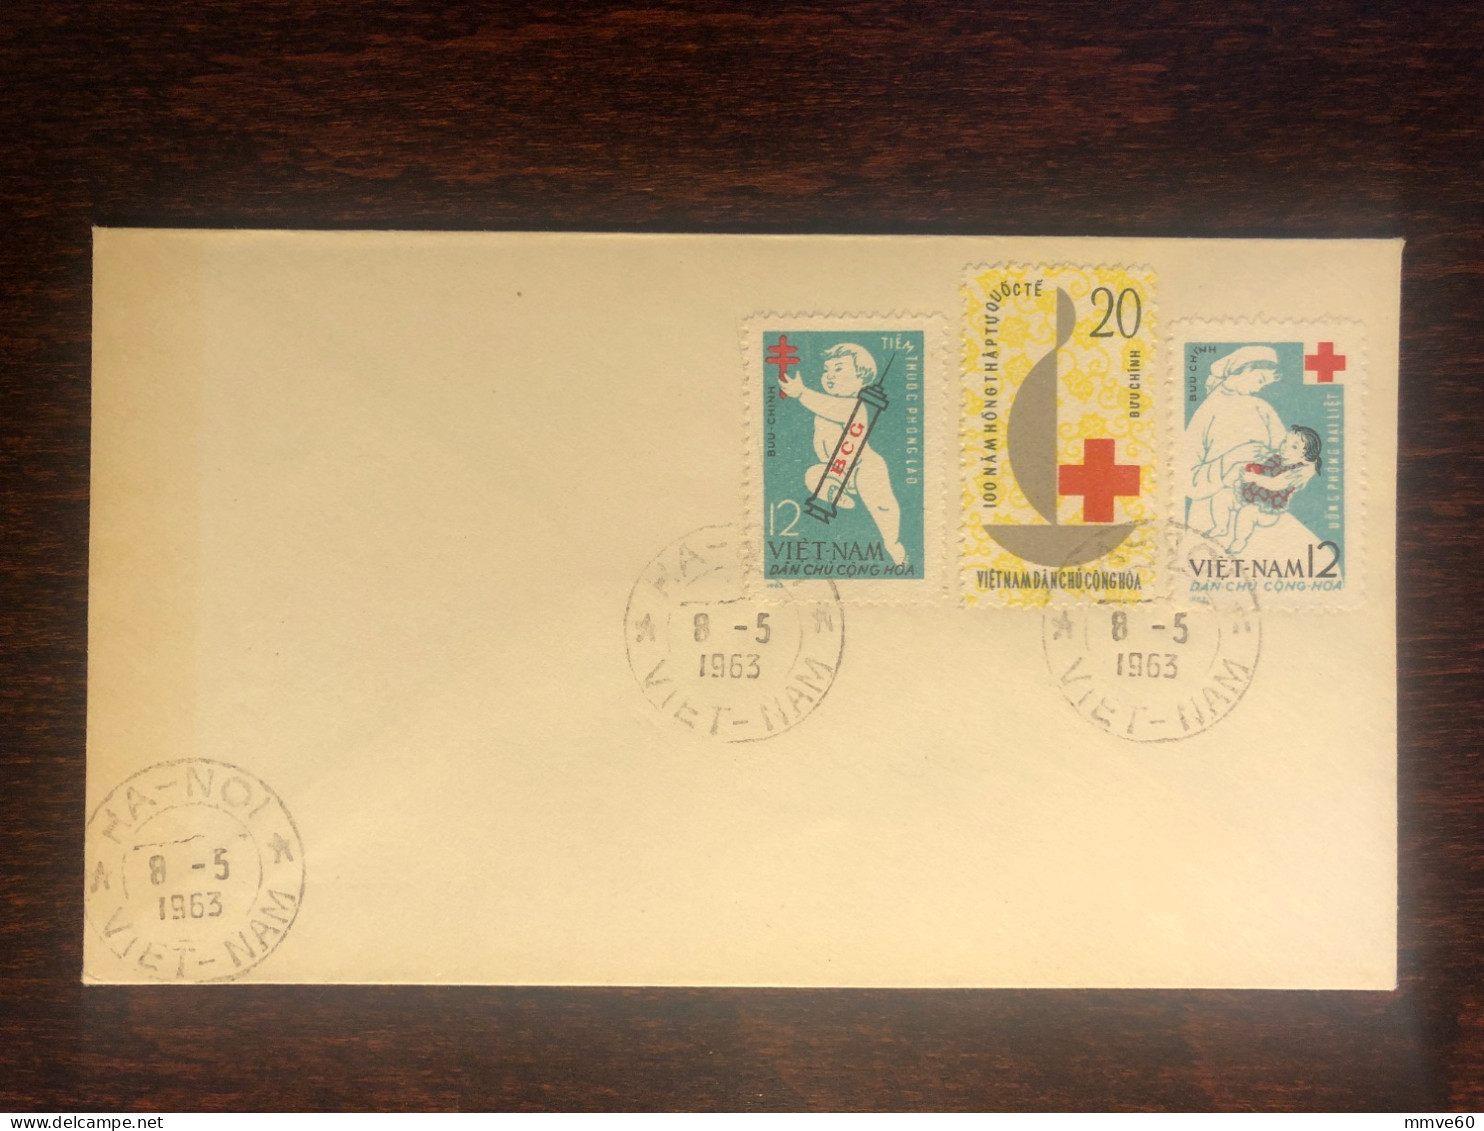 VIETNAM NORTH  FDC COVER 1963 YEAR RED CROSS TUBERCULOSIS BCG HEALTH MEDICINE STAMPS - Viêt-Nam